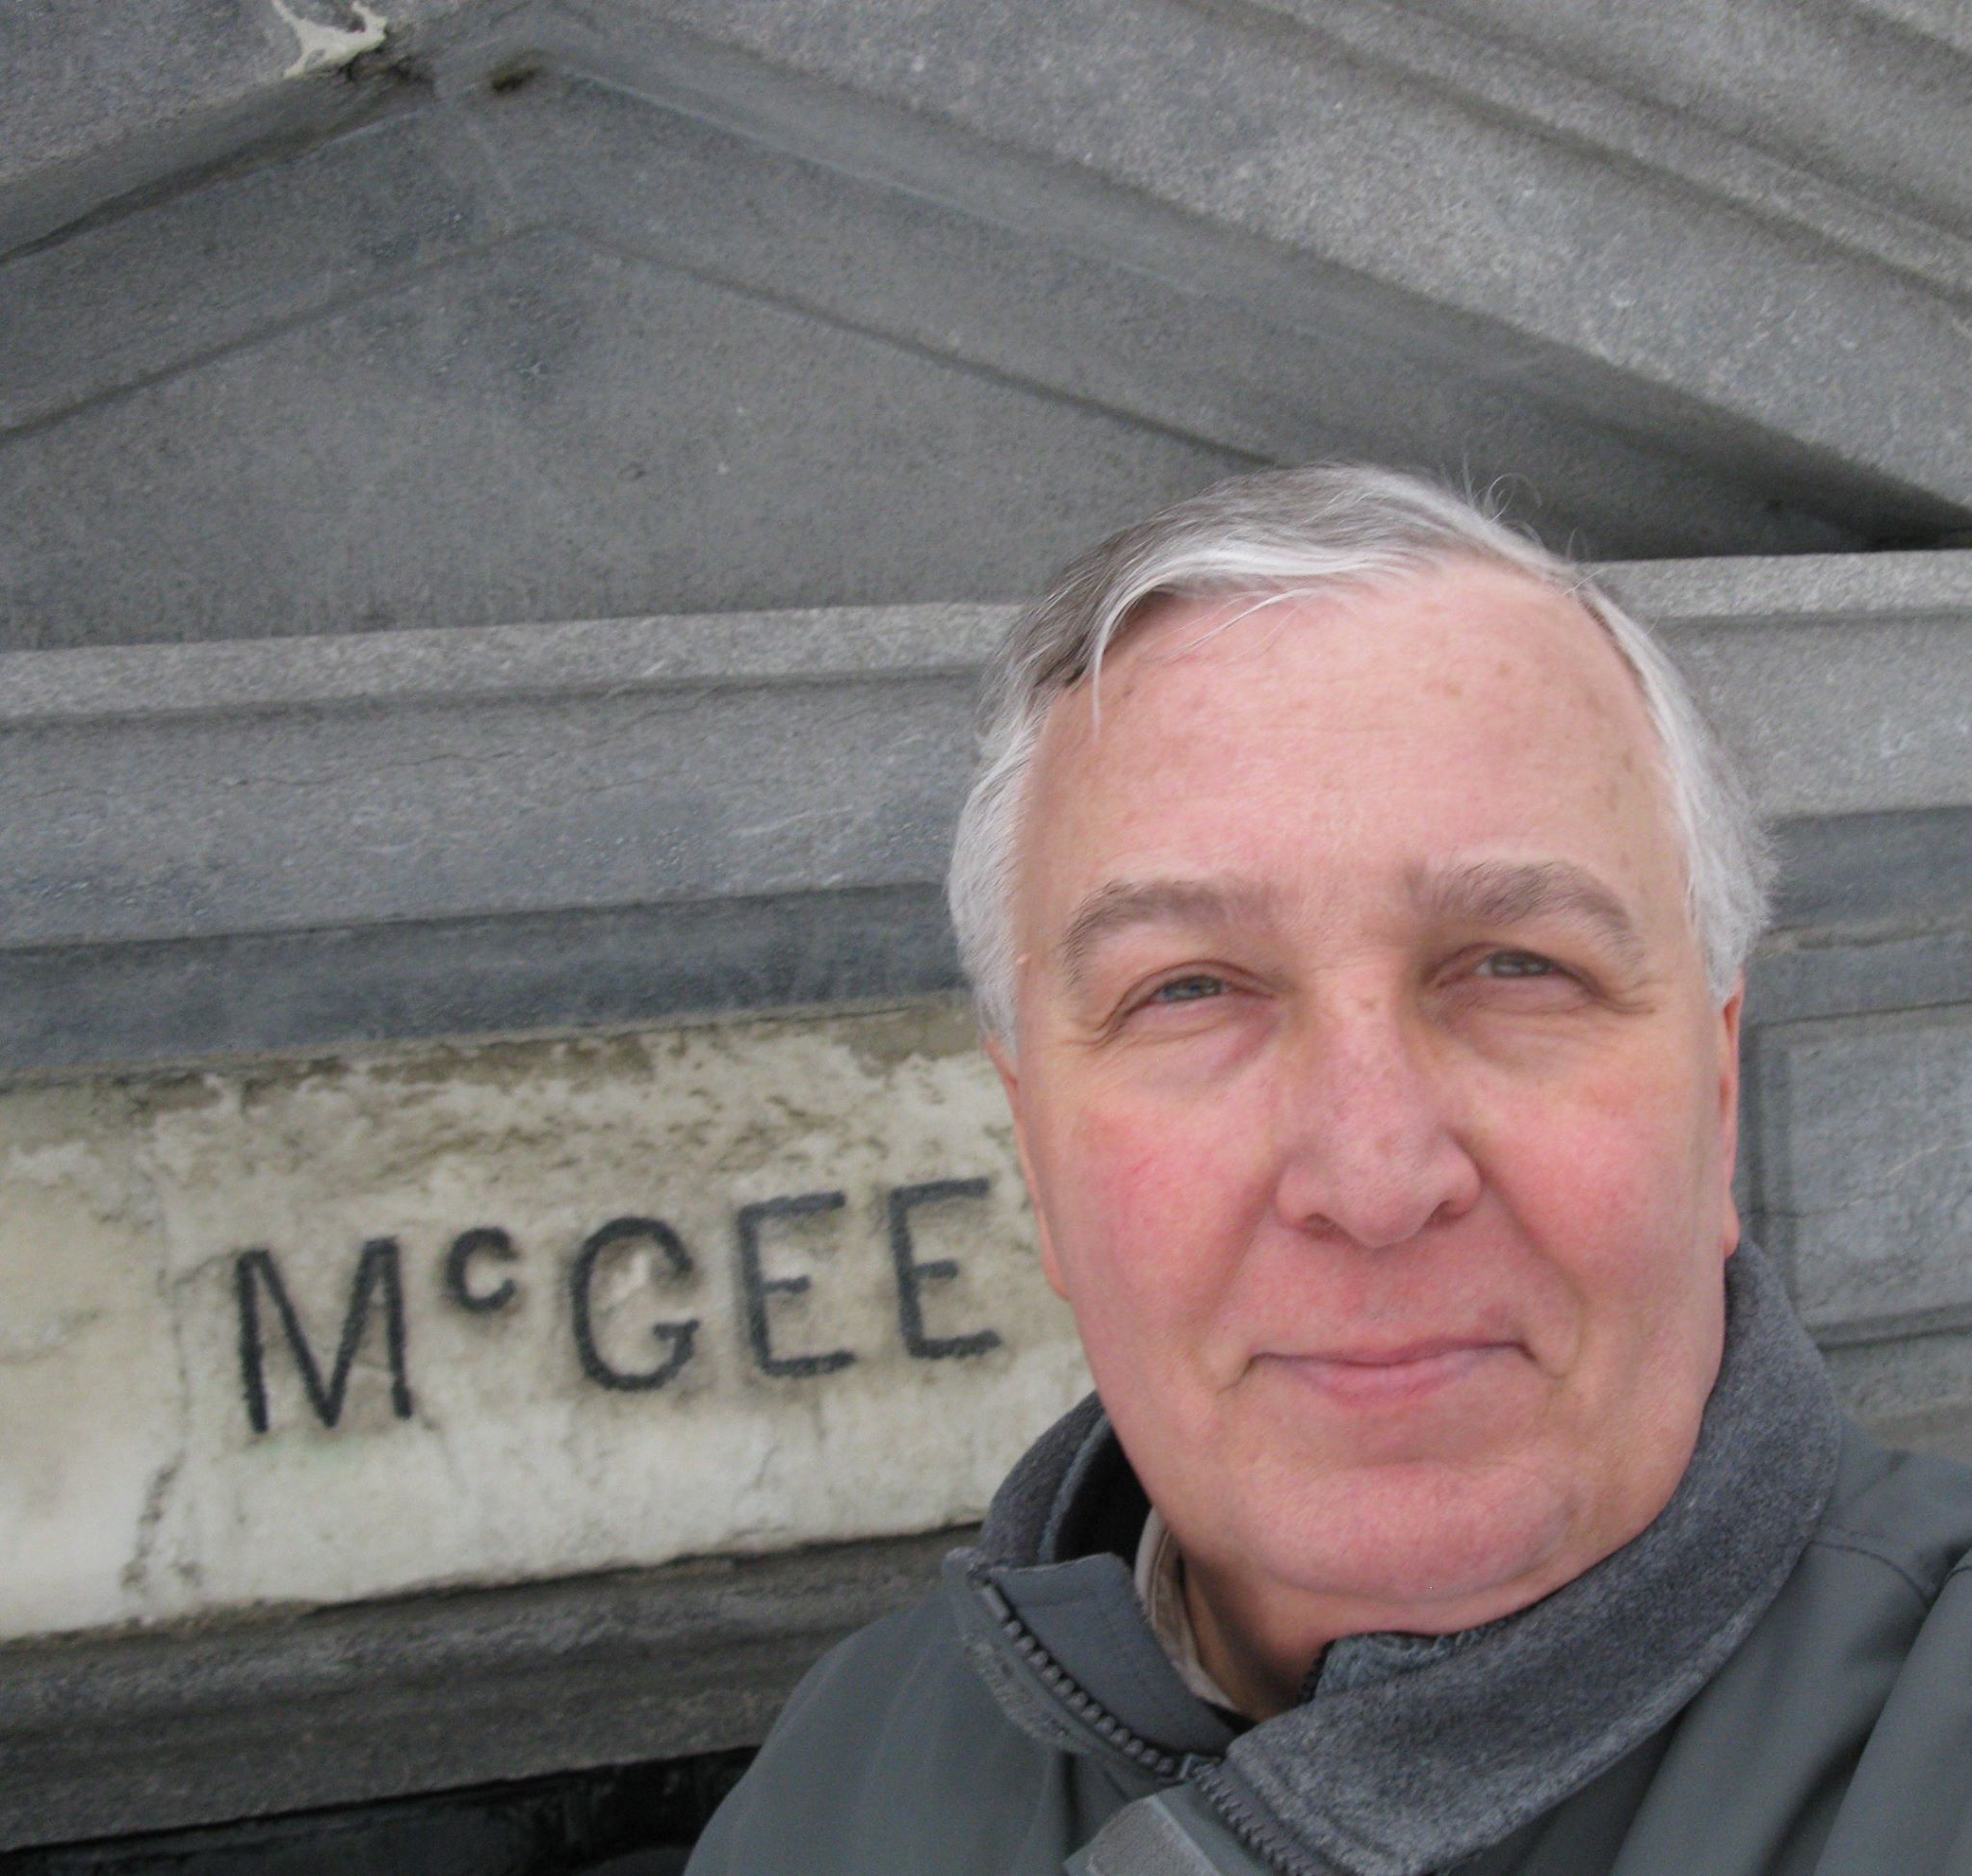 Stephen Morrissey at the tomb of Darcy McGee